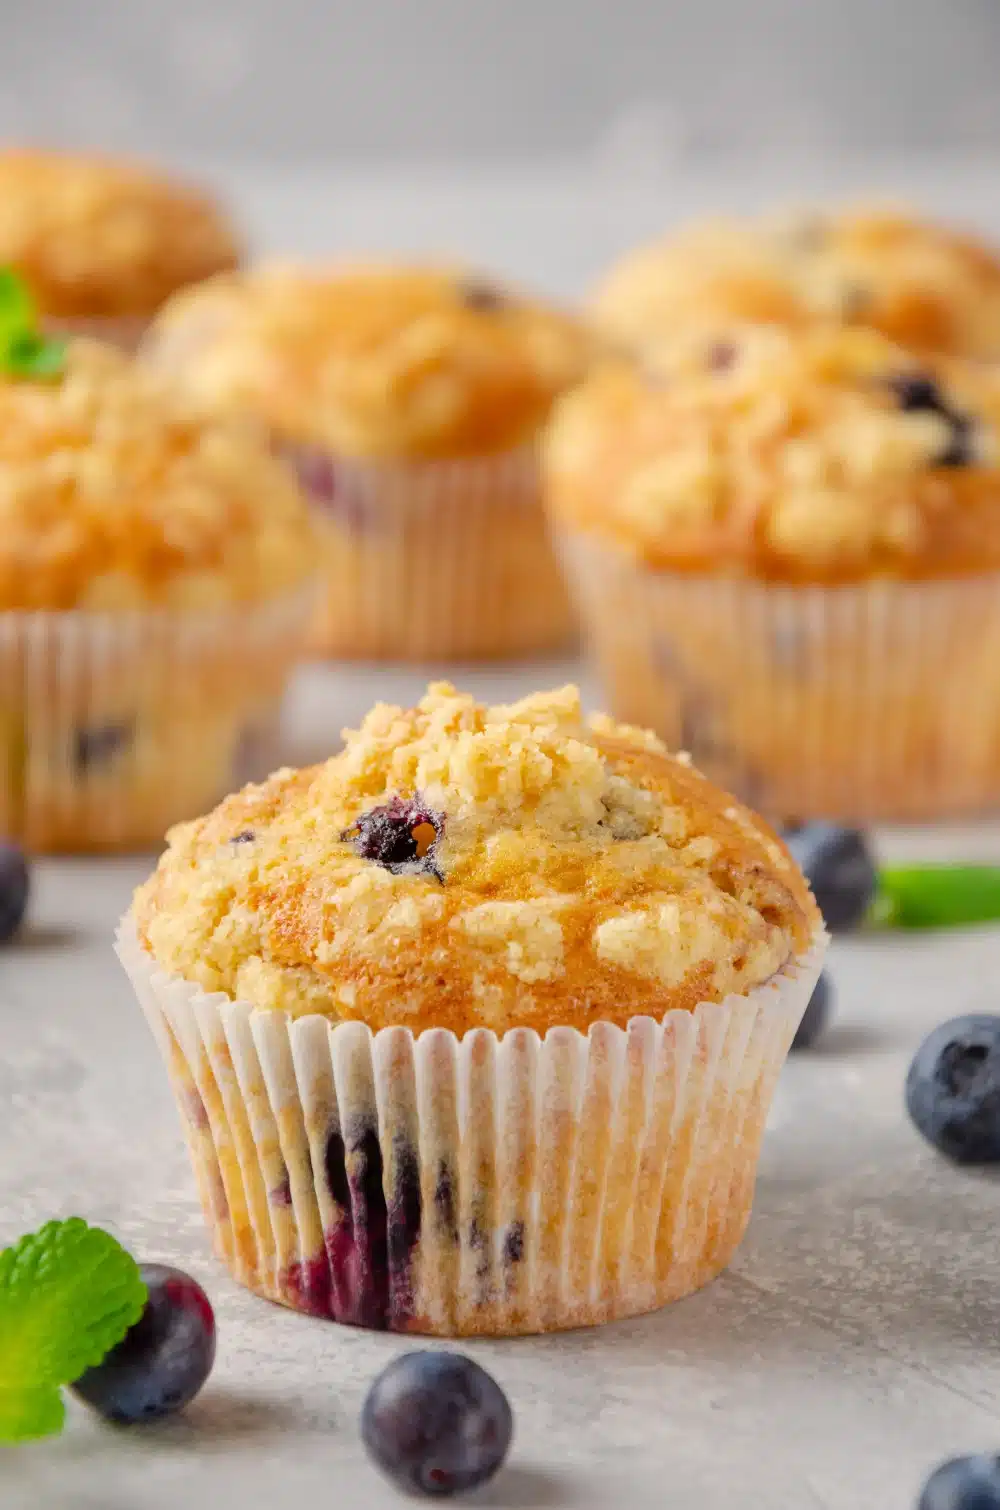 Lemon Blueberry Muffins | Cooking Clue